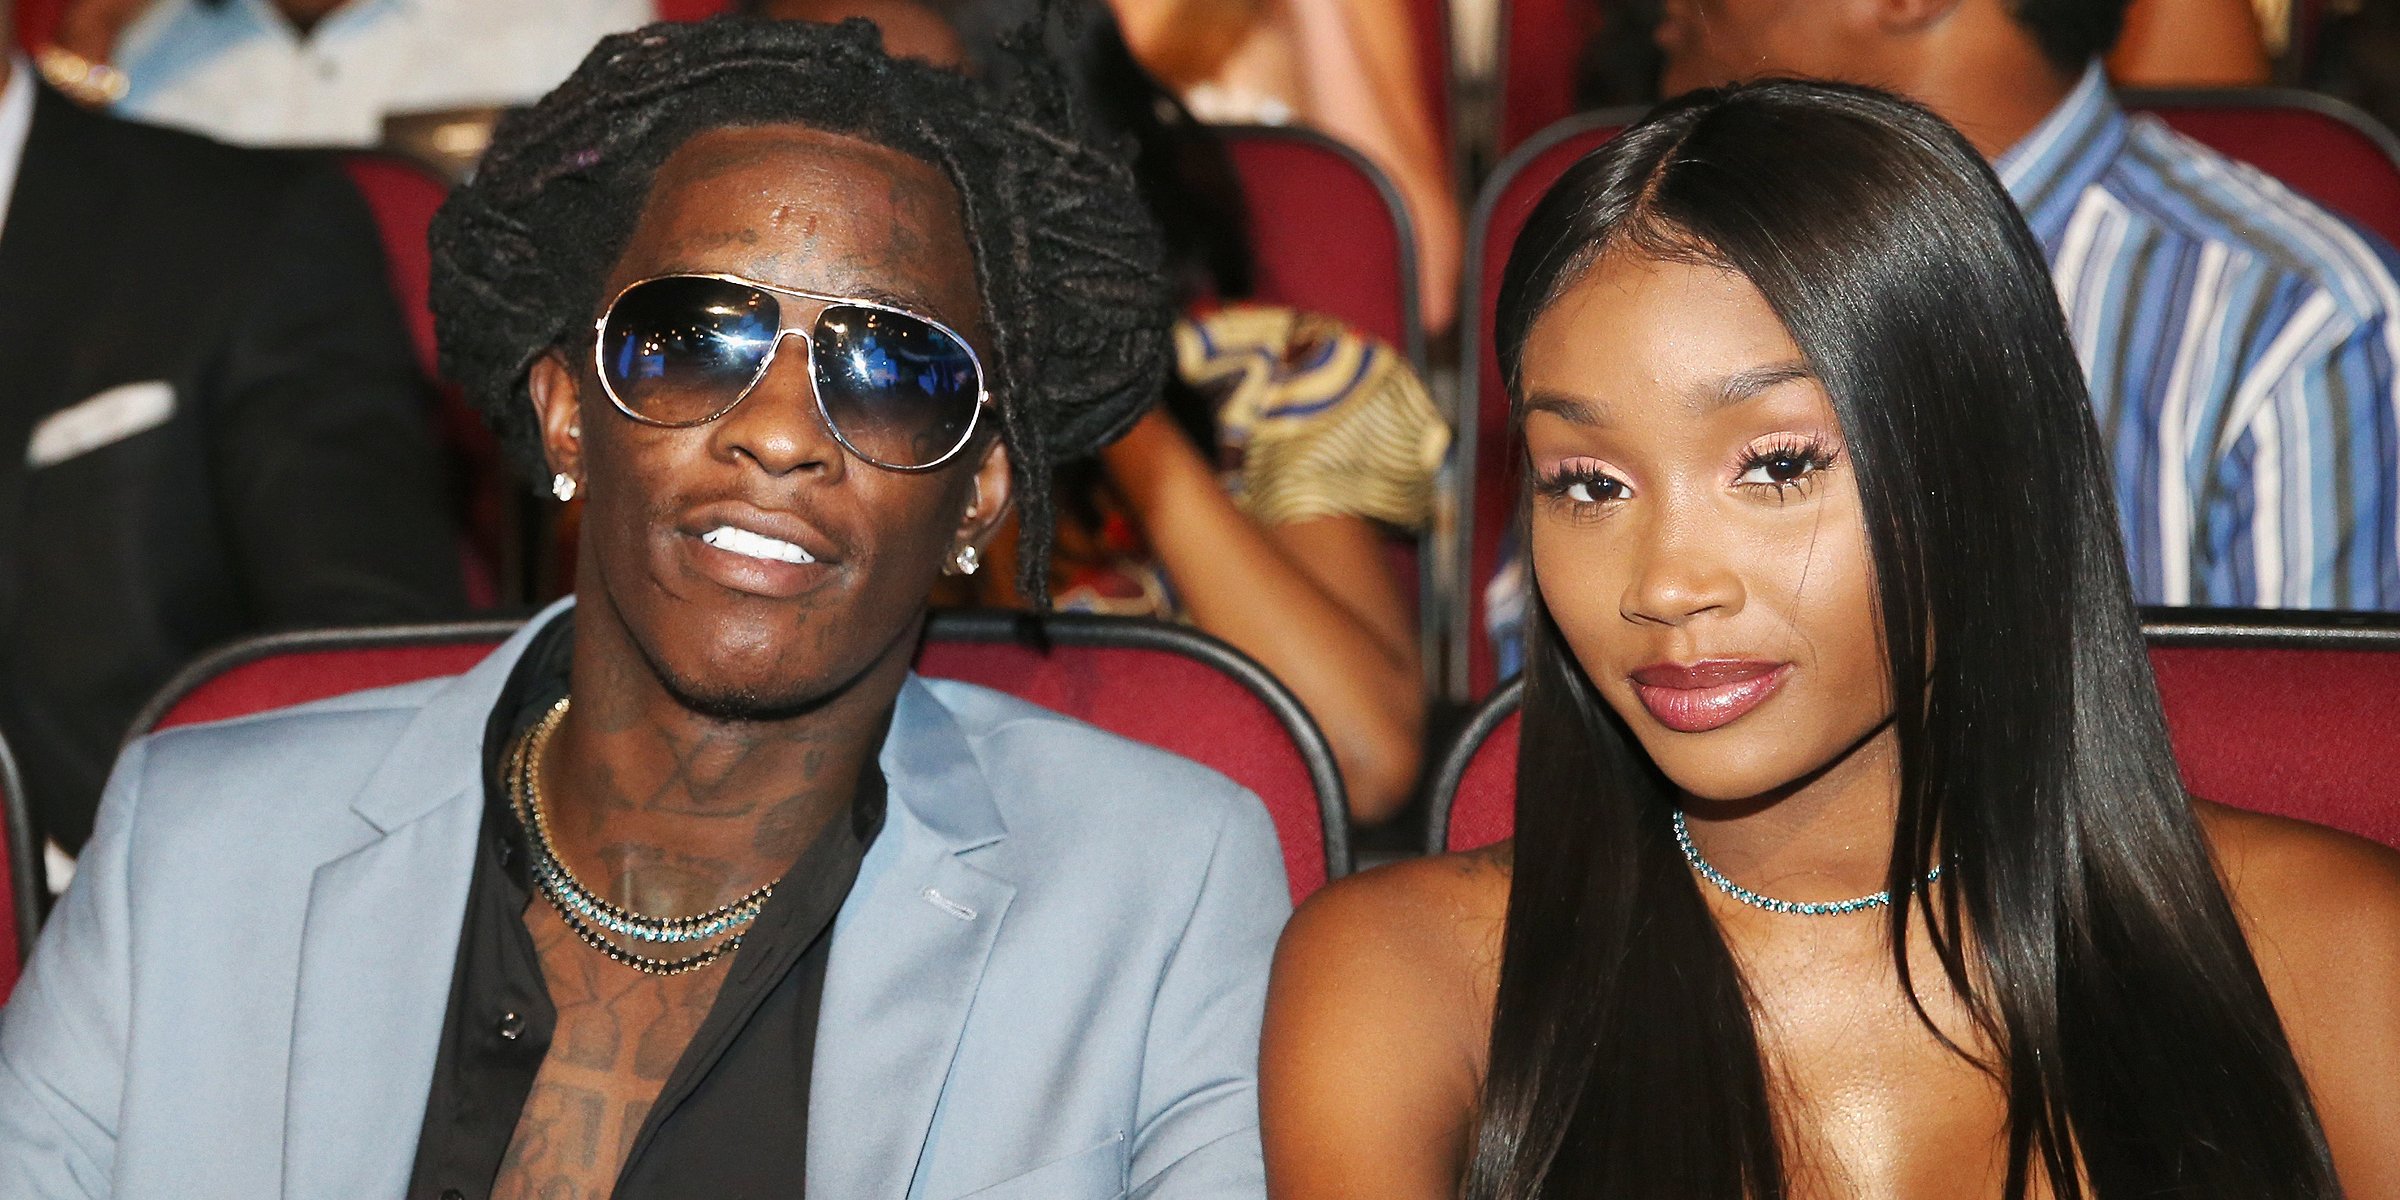 Jerrika Karlae and Young Thug | Source: Getty Images